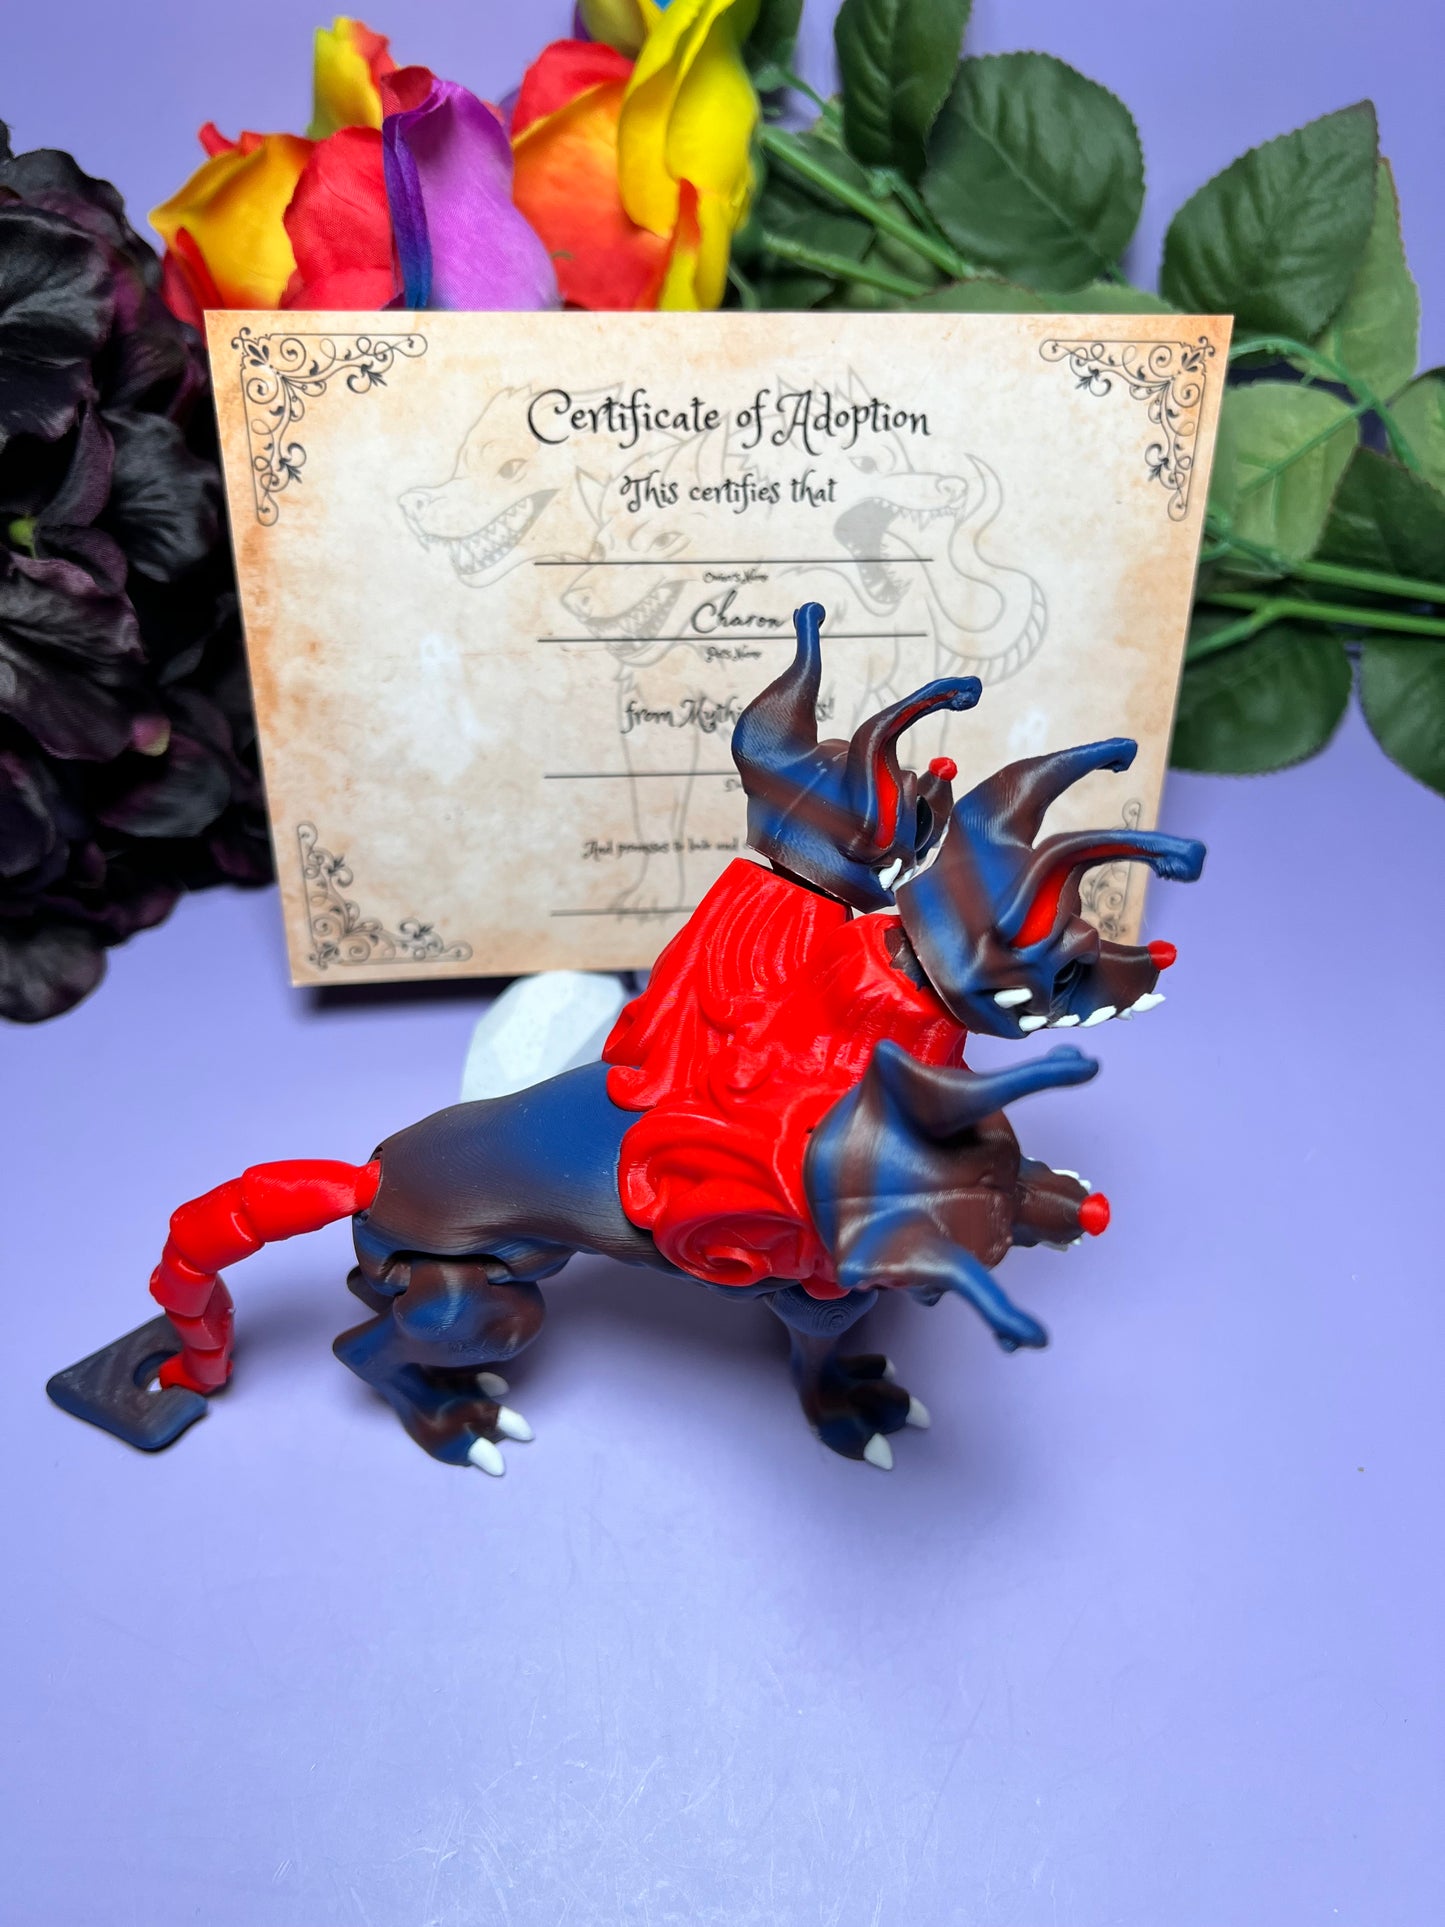 Charon - The Wandering Cerberus  - Mythical Pets